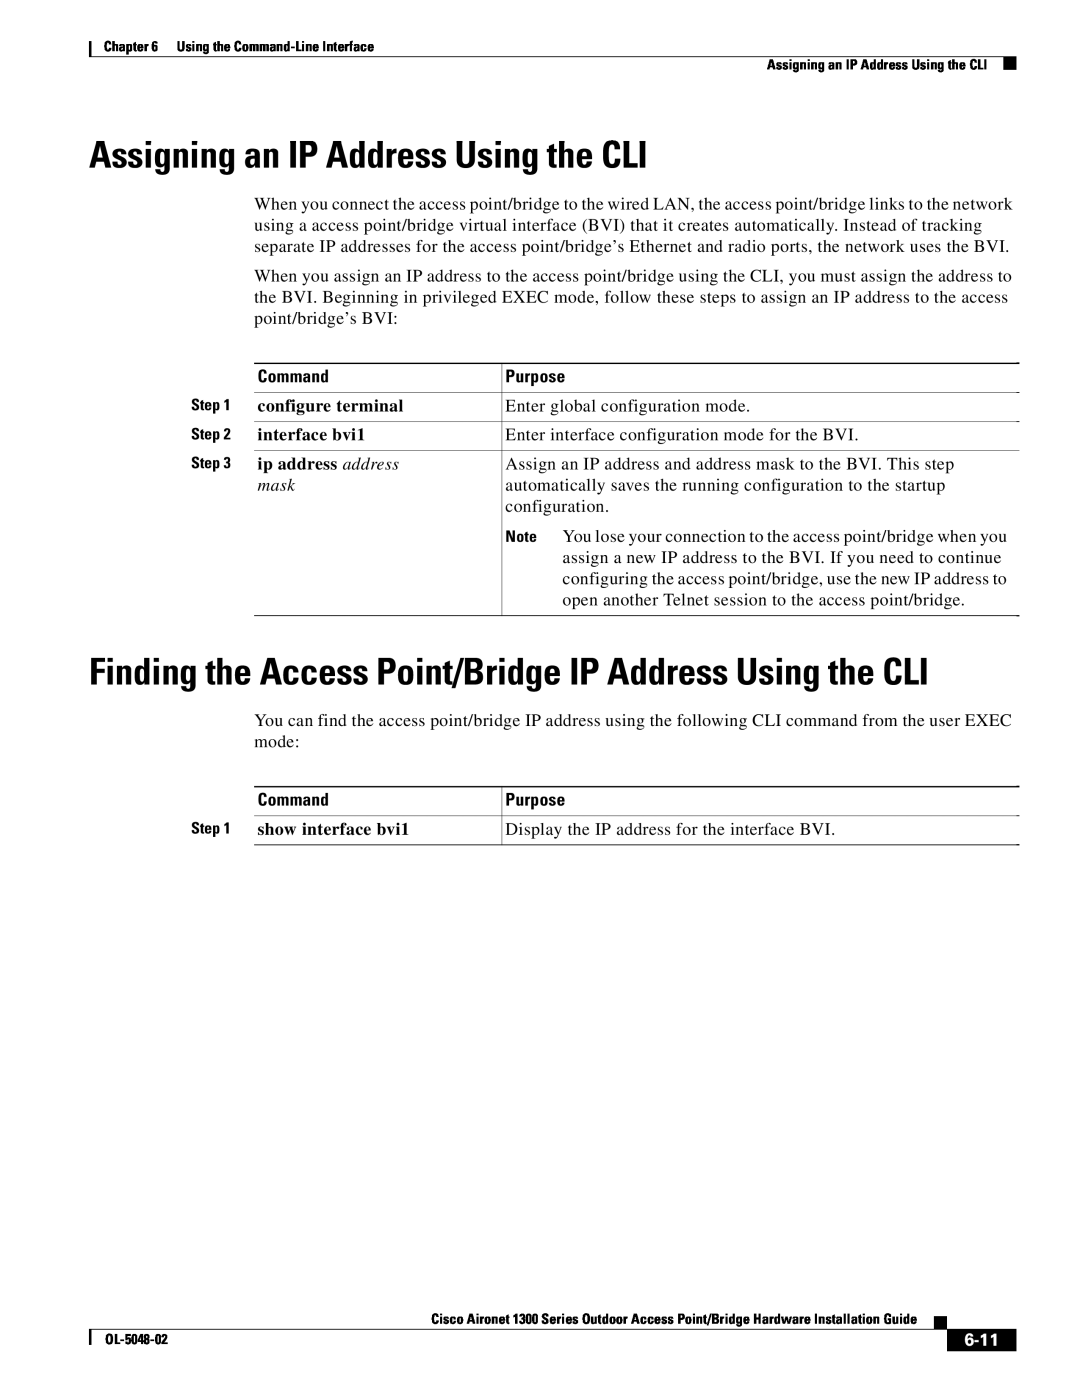 Cisco Systems 1300 Series manual Finding the Access Point/Bridge IP Address Using the CLI, show interface bvi1, 6-11, mask 